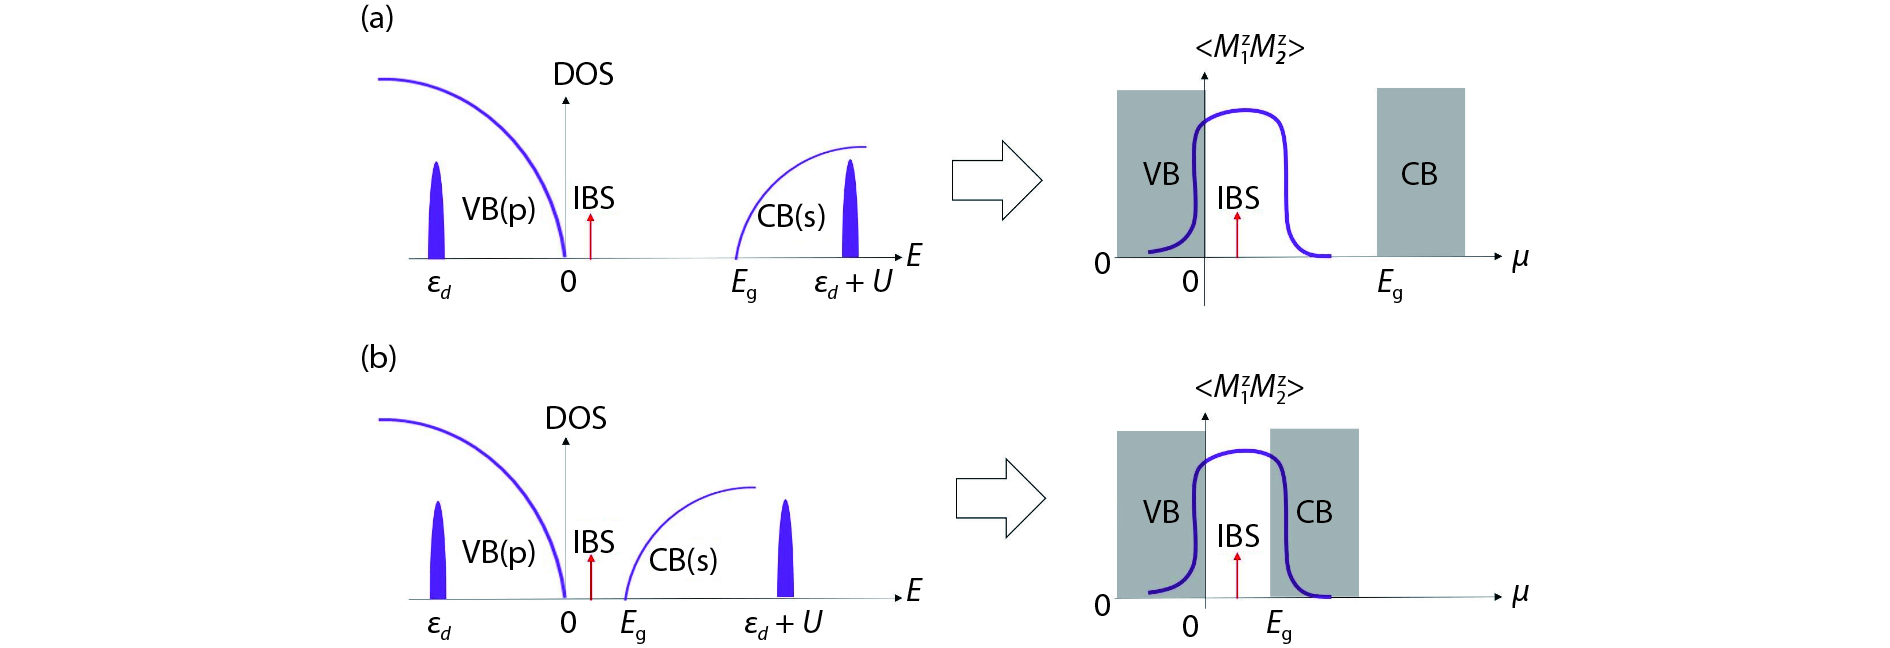 (Color online) Schematic pictures of magnetic semiconductors with (a) wide band gaps and (b) narrow band gaps. The band gap is . The top of valence band (VB) is dominated by p orbitals, and the bottom of conduction band (CB) is dominated by s orbitals. For the impurity with d orbitals, is impurity level of d orbitals, and is the on-site Coulomb interaction. Impurity bound state (IBS) is also developed due to the doping of impurity into the host. The density of state (DOS) as a function of energy, and the magnetic correlation between two impurities as a function of the chemical potential are depicted. (a) Due to strong mixing between the impurity and the VB, the position of the IBS (arrow) is close to the top of the VB. Due to weak mixing between the impurity and the CB, usually no IBS appears below the bottom of the CB[19–21]. Thus, we have 0 for the wide band gap case. By the condition , positive (FM coupling) can develop[22–24]. For p-type carriers (), ferromagnetic coupling can be obtained as the condition can be satisfied. For n-type carriers (), no magnetic coupling is obtained between impurities because the condition cannot be satisfied[19–21]. (b) Case for narrow band gap . By choosing suitable host semiconductors and impurities, the condition 0 can be obtained. For both p-type and n-type carriers, ferromagnetic coupling can be obtained because the condition is satisfied.